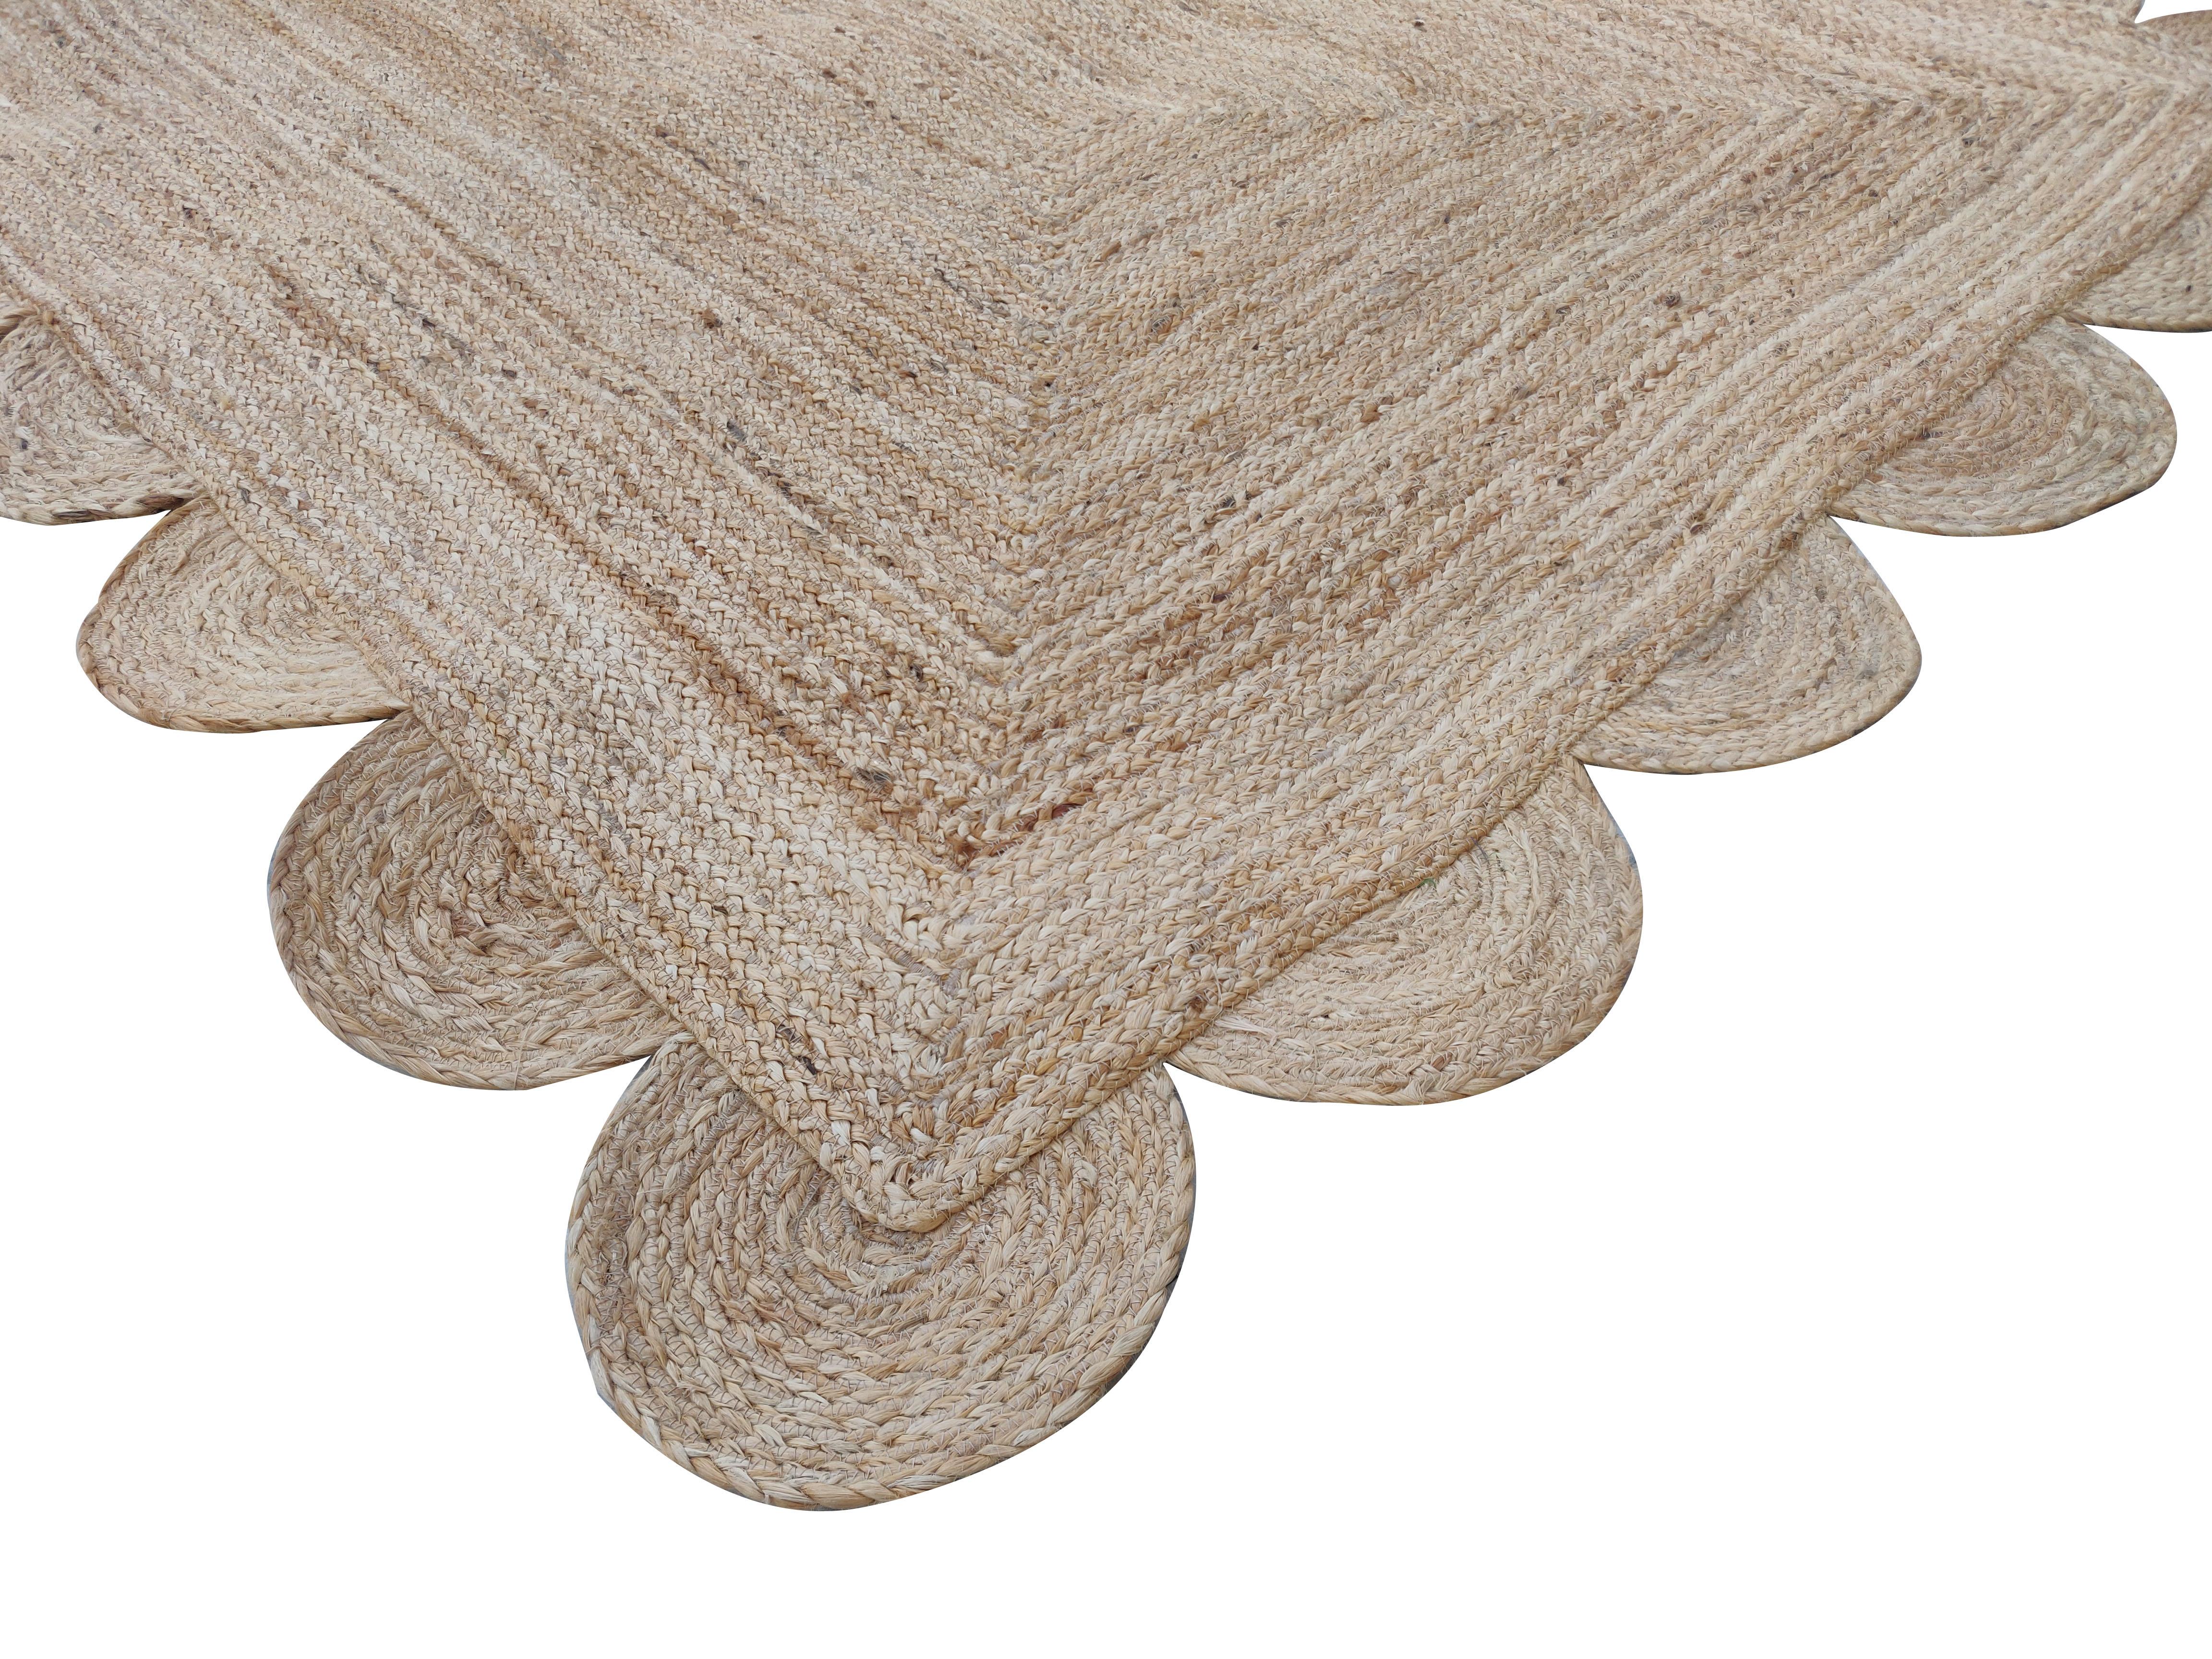 Handmade Jute Scalloped Rug, Natural Jute Dhurrie -4'x6'

These special flat-weave dhurries are hand-woven with 15 ply 100% cotton yarn. Due to the special manufacturing techniques used to create our rugs, the size and color of each piece may vary a